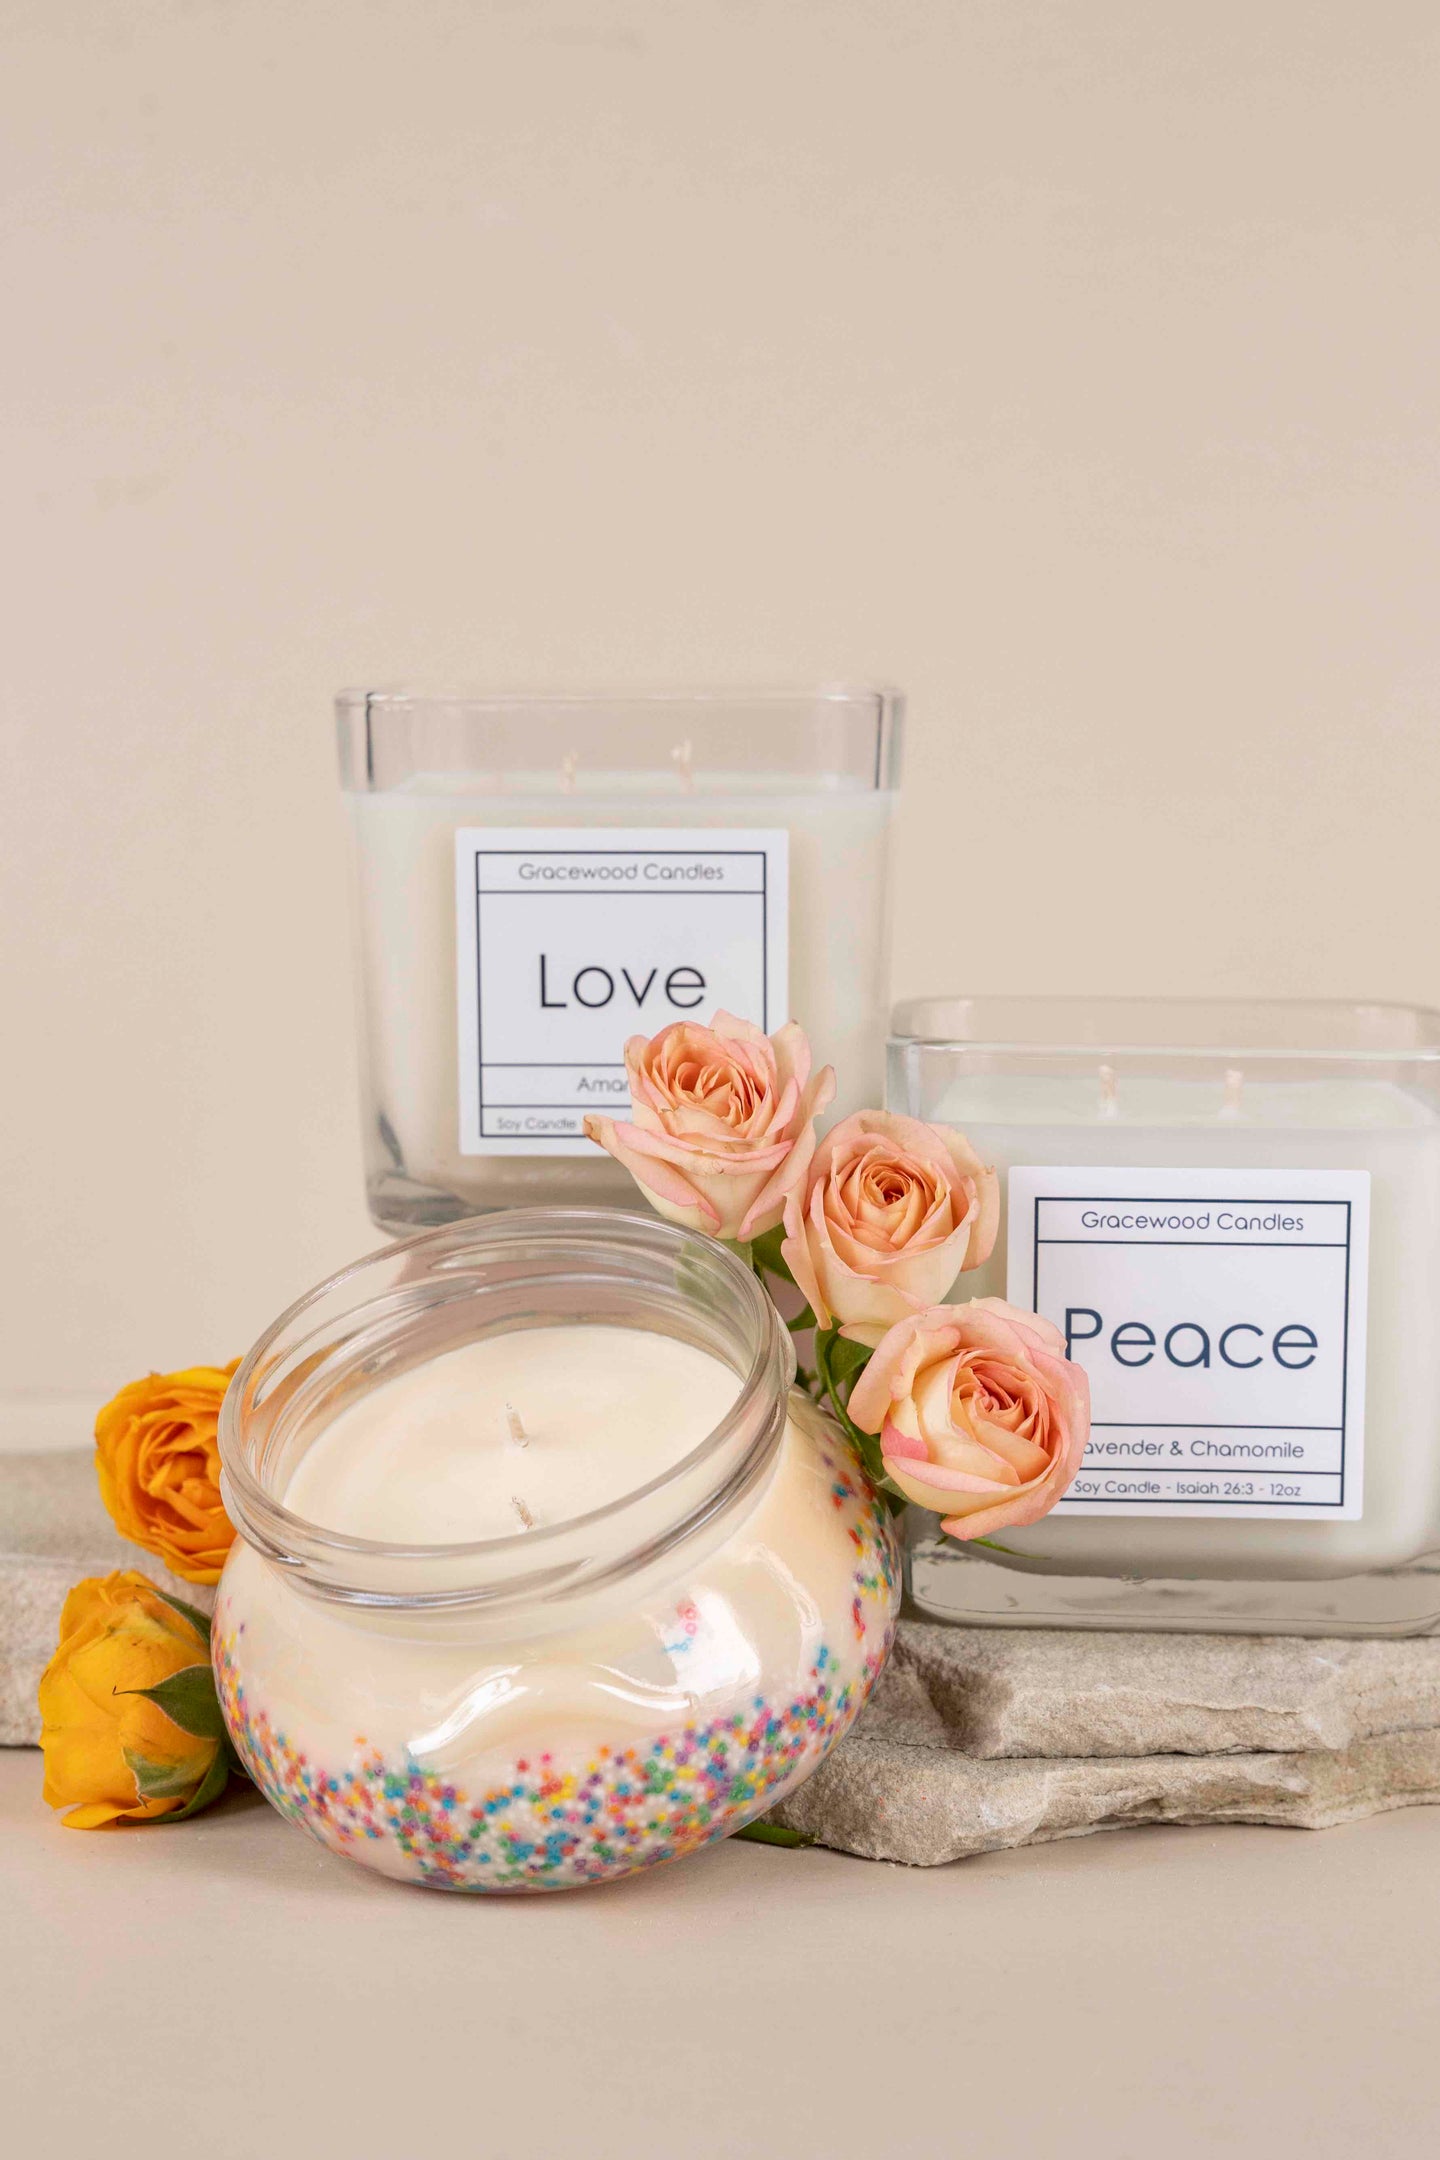 candle making grand rapids, candle, soy candle, candle for peace, candle for mom, candle making near me, candle making classes, gracewood, christian candle company, handmade, inspirational gift, christian gift,  inspirational gift, gracewood